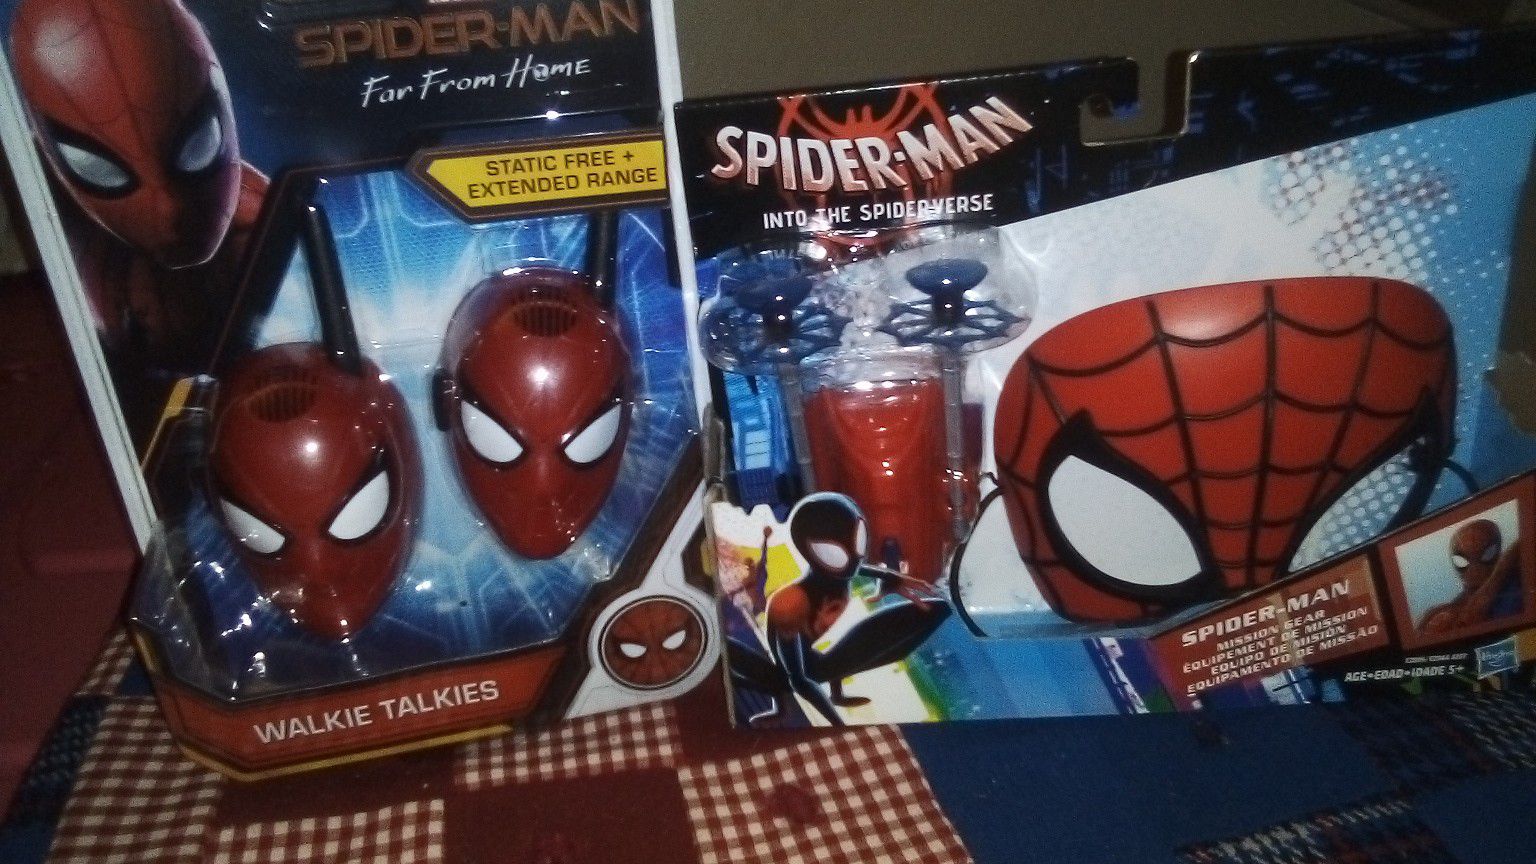 Spiderman walkie talkies and into the spider verse